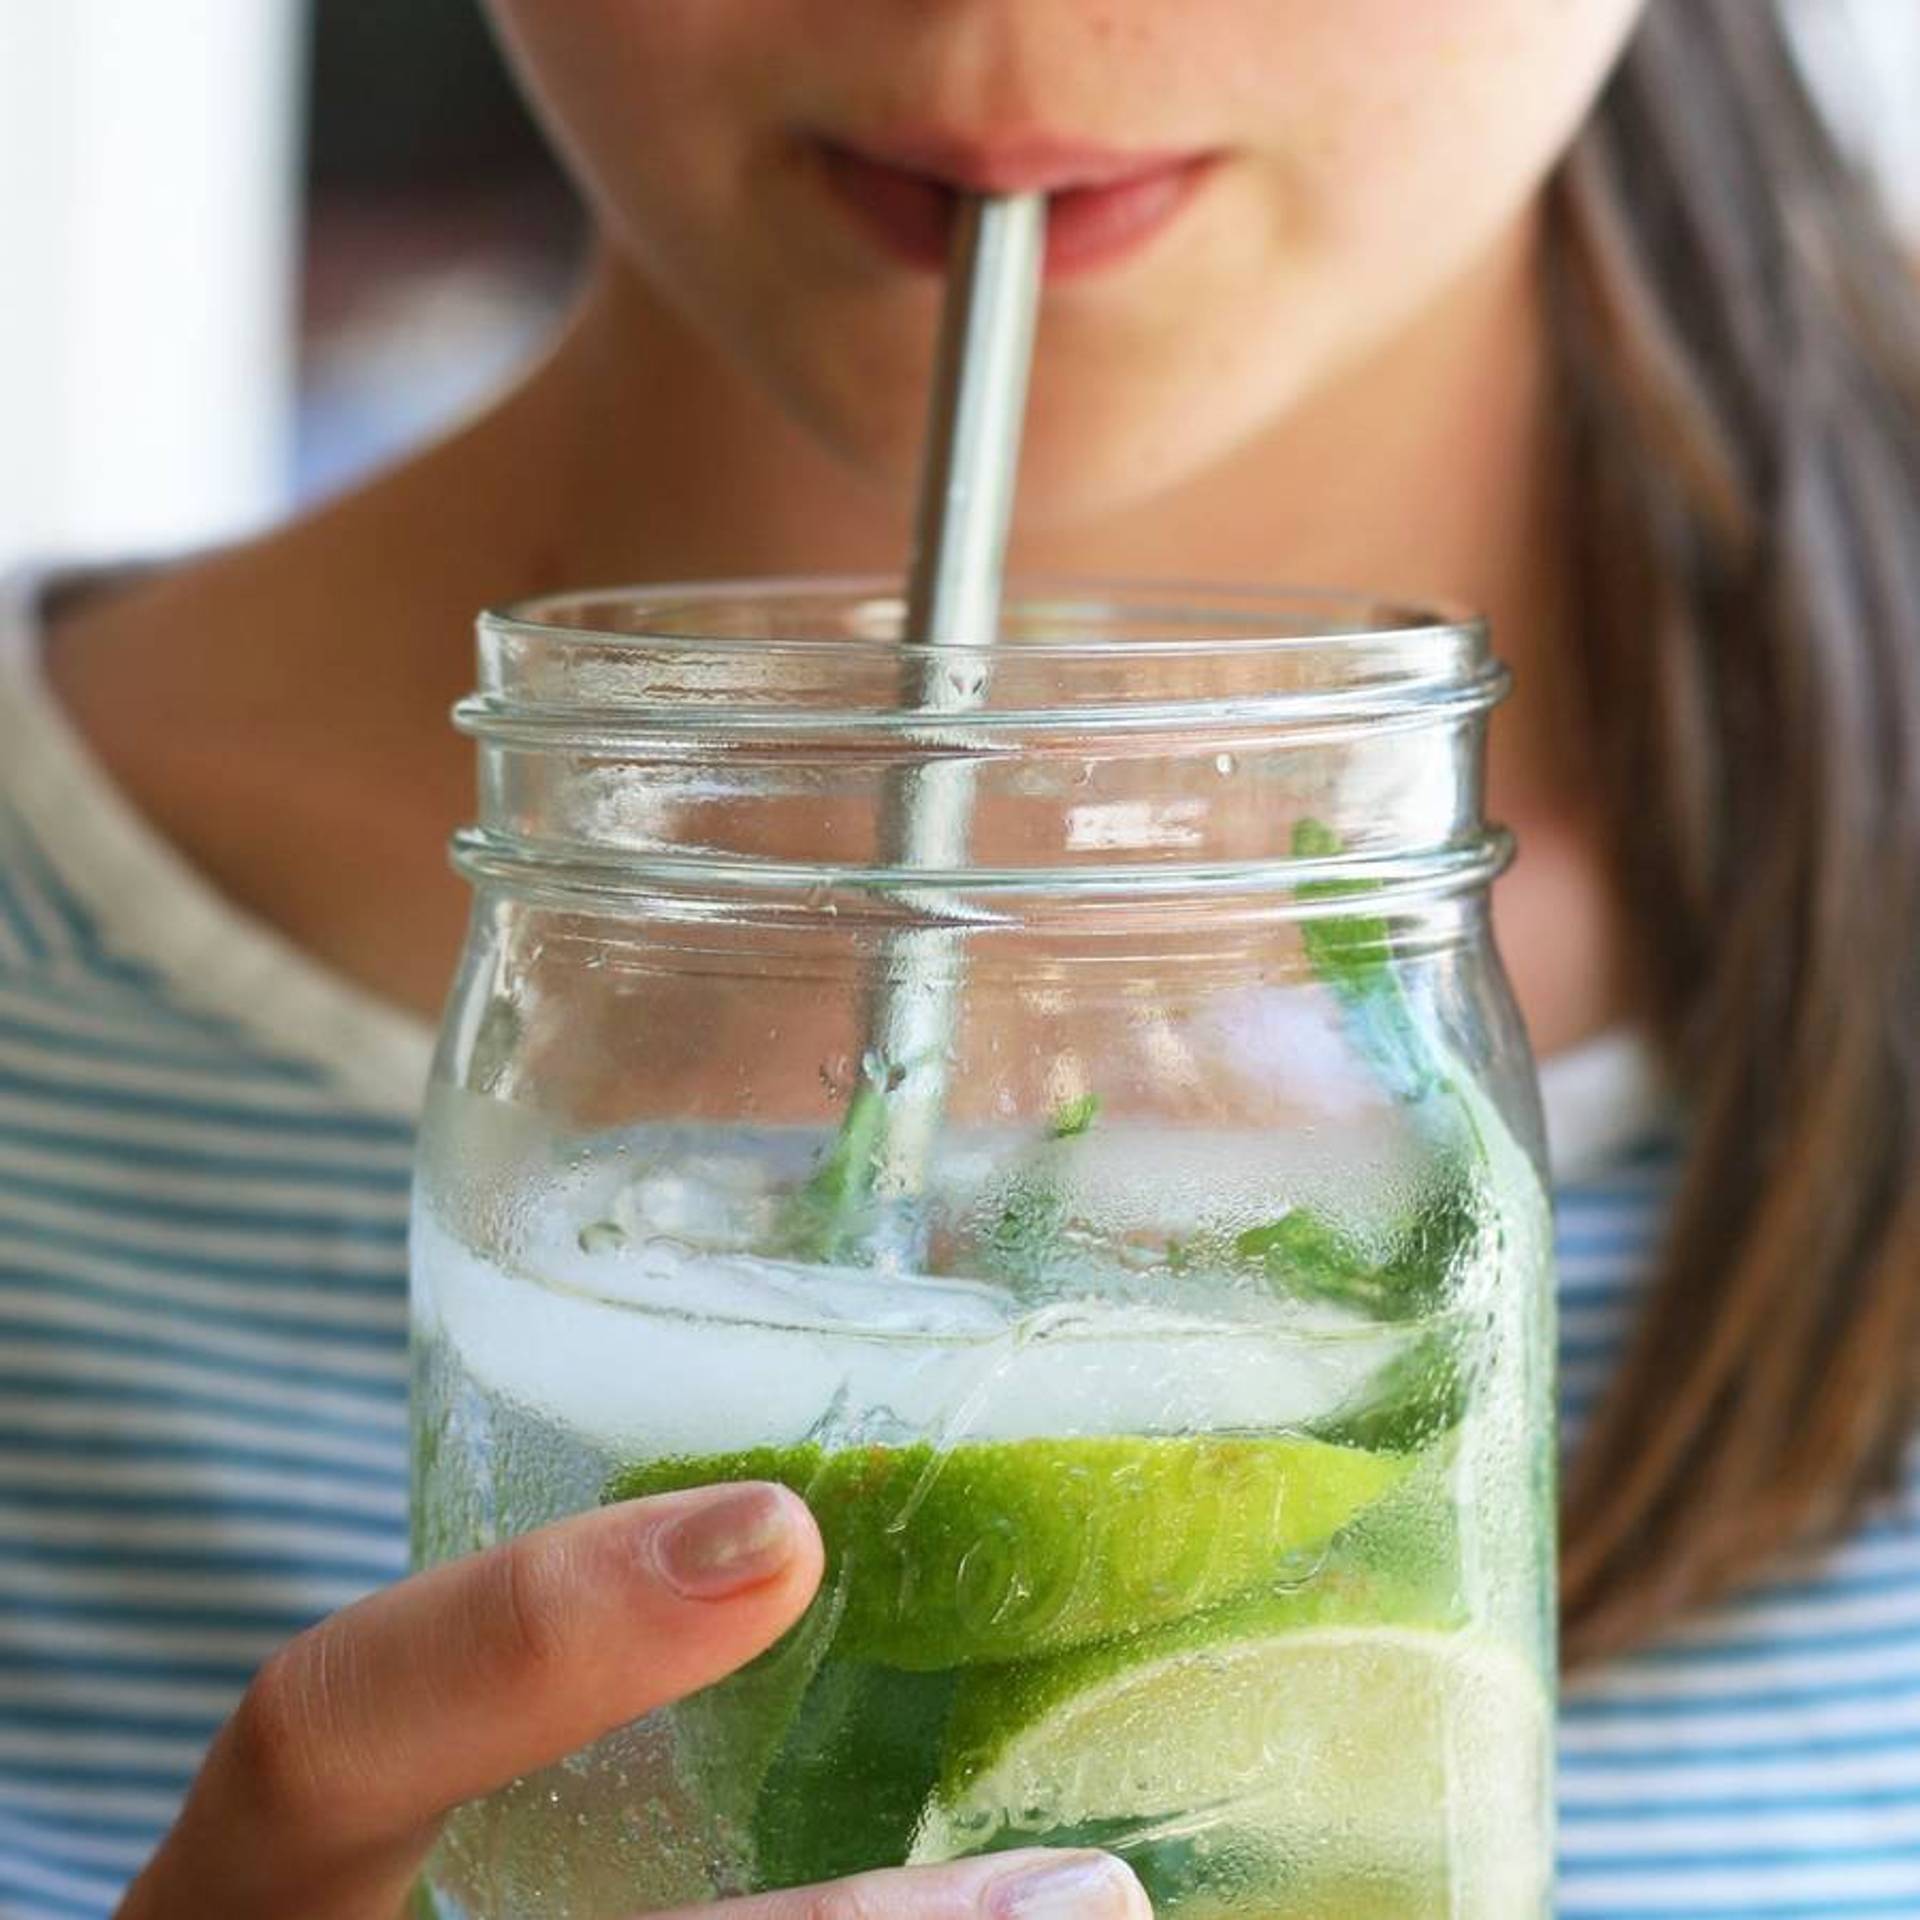 Picky eco-drinkers are buying metal straws